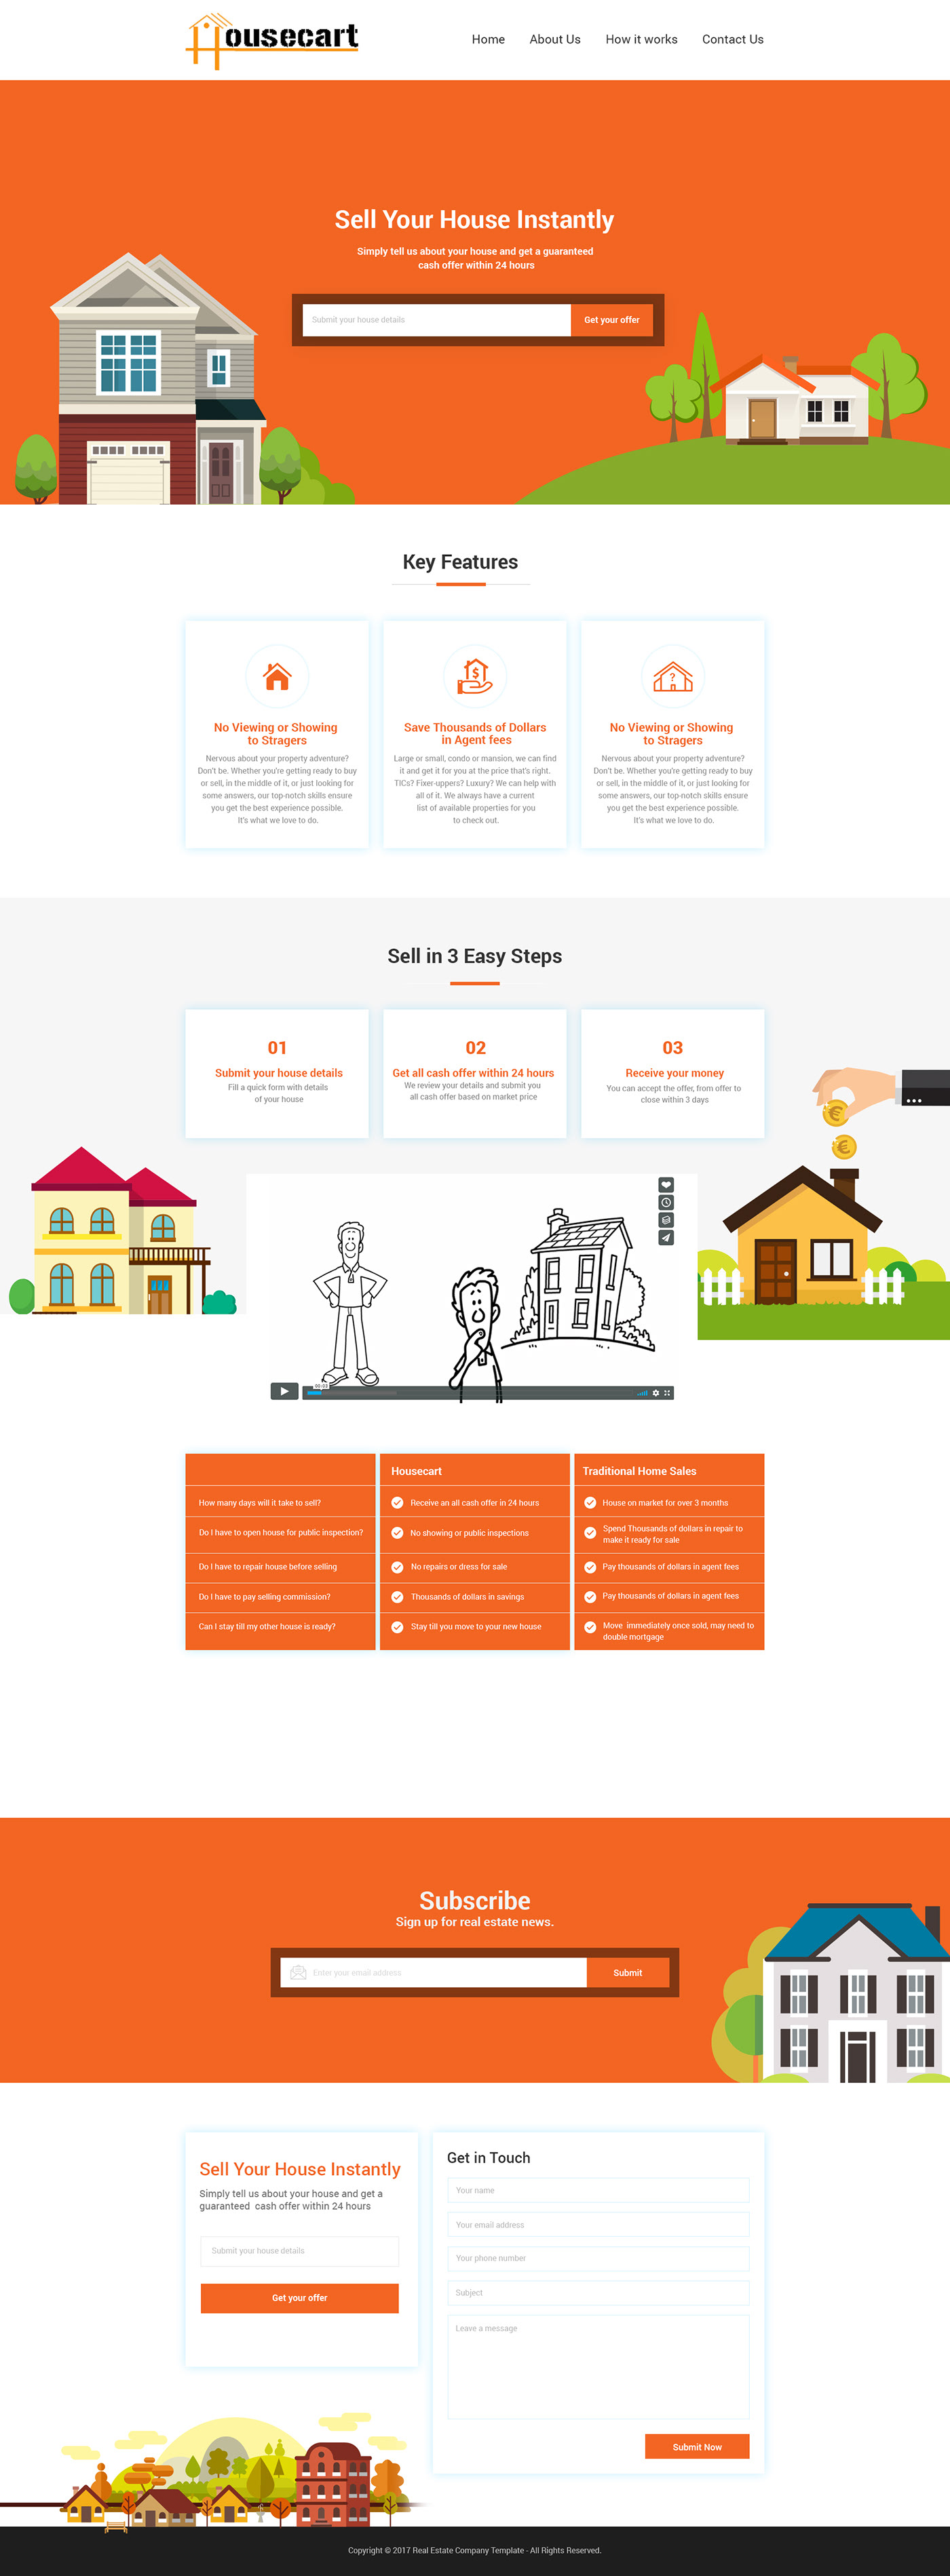 Home Listing Website PSD template , House sell and reals estate